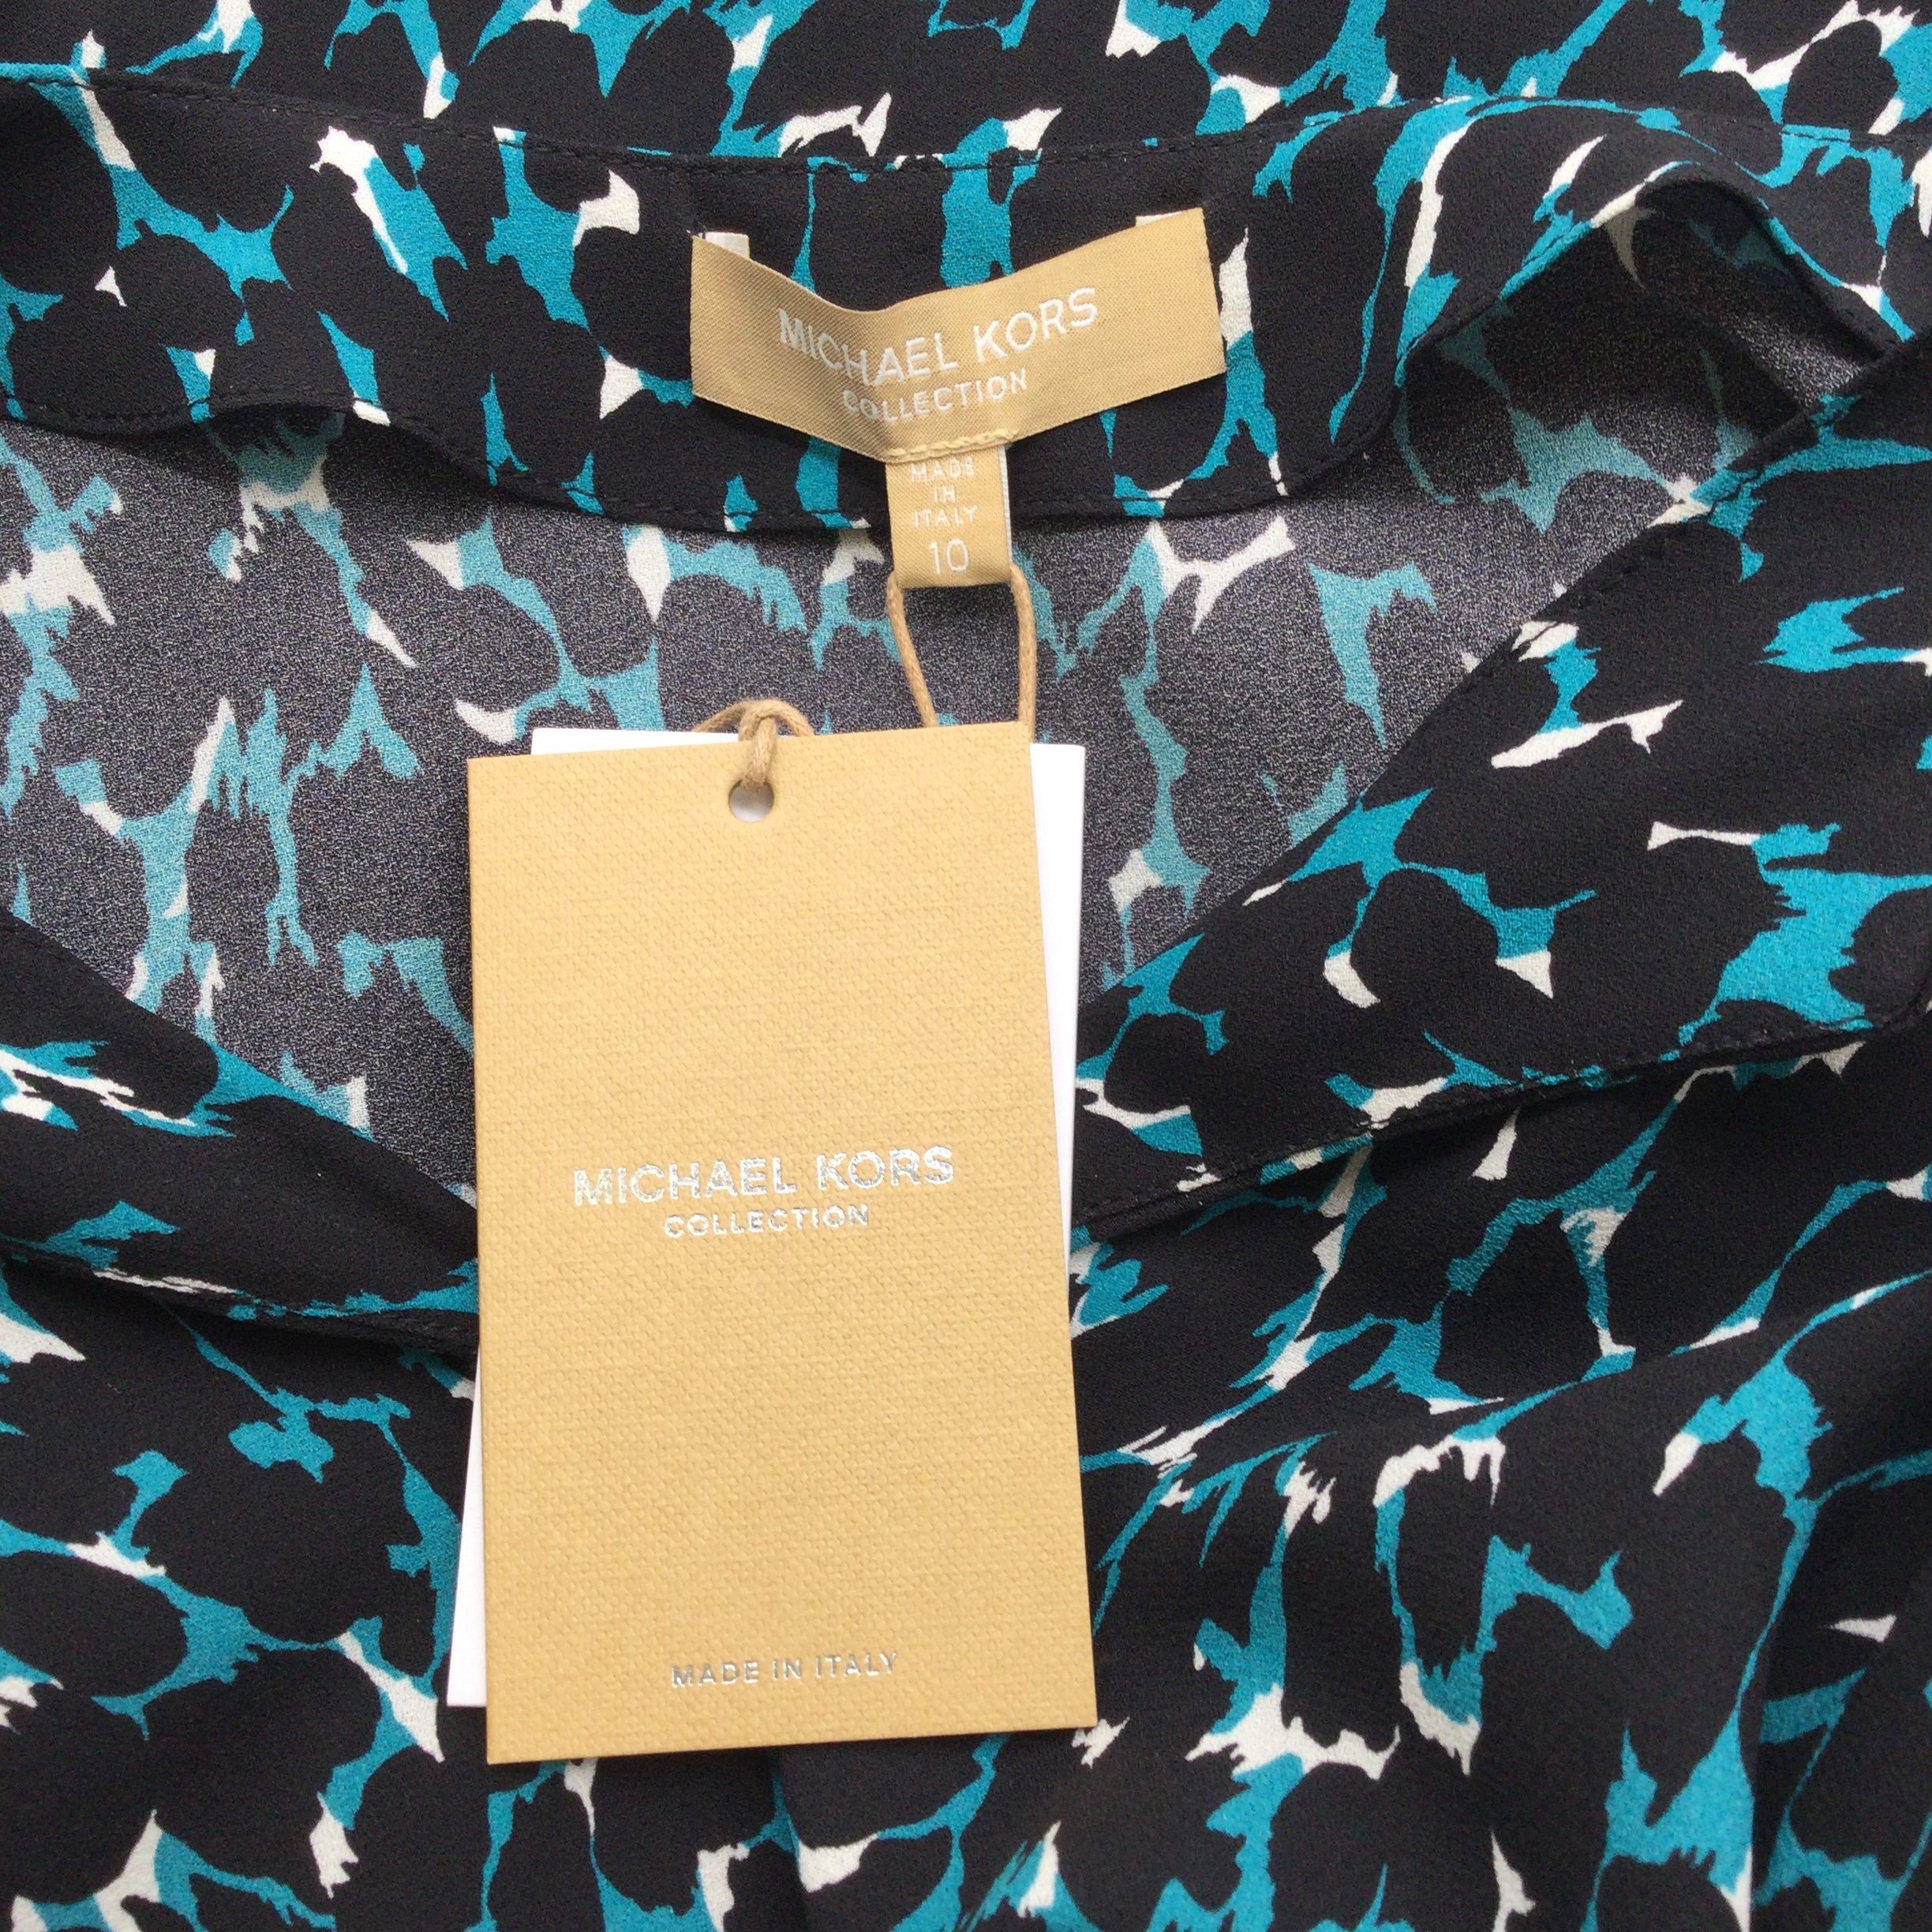 Michael Kors Collection Black / Turquoise Long Sleeved Printed Silk Crepe Blouse